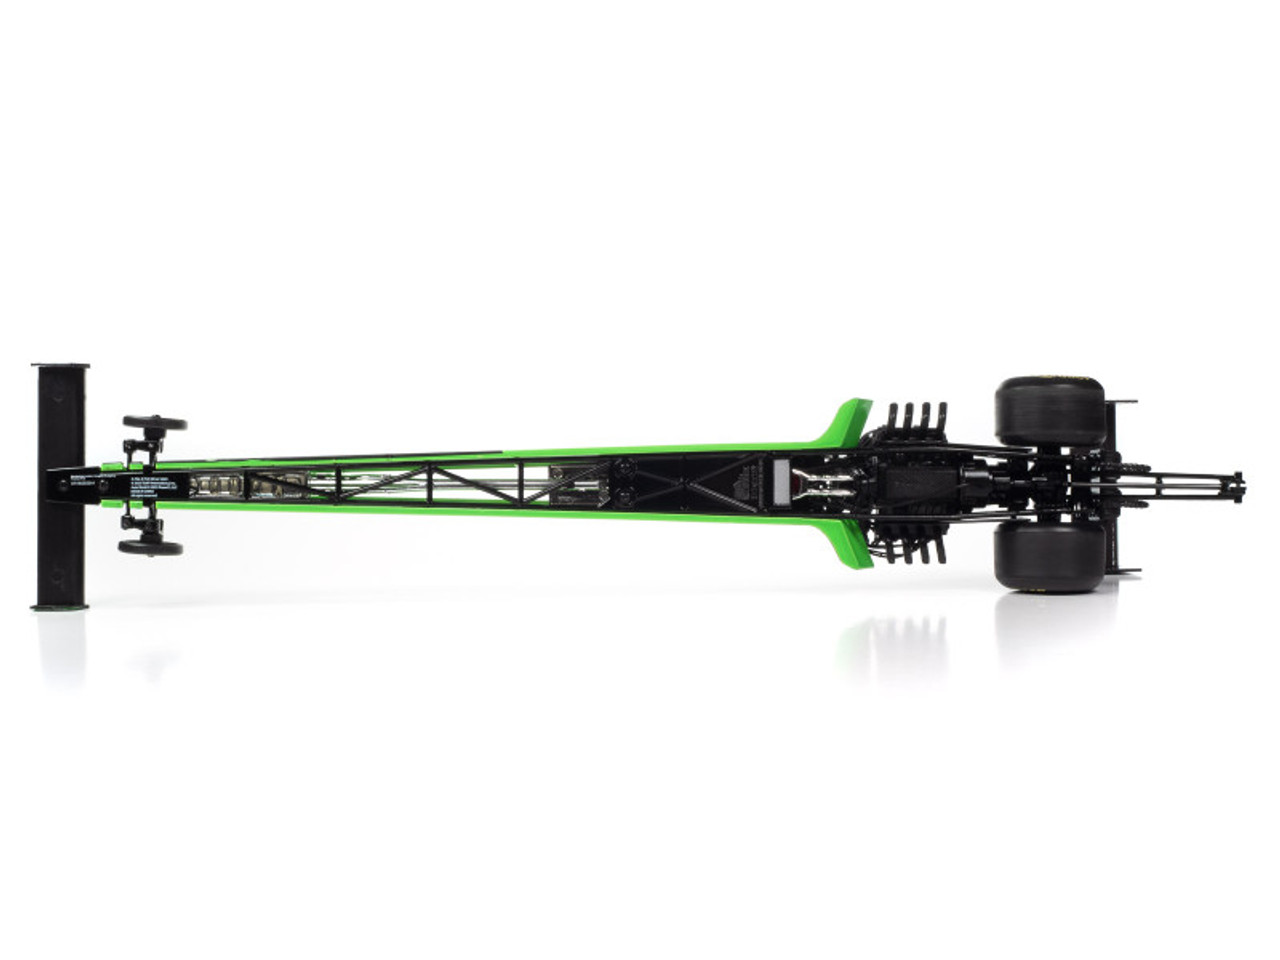 2023 NHRA TFD (Top Fuel Dragster) Leah Pruett "MOPAR - Direct Connection" Green and Black "Tony Stewart Racing" Limited Edition to 1020 pieces Worldwide 1/24 Diecast Model by Auto World